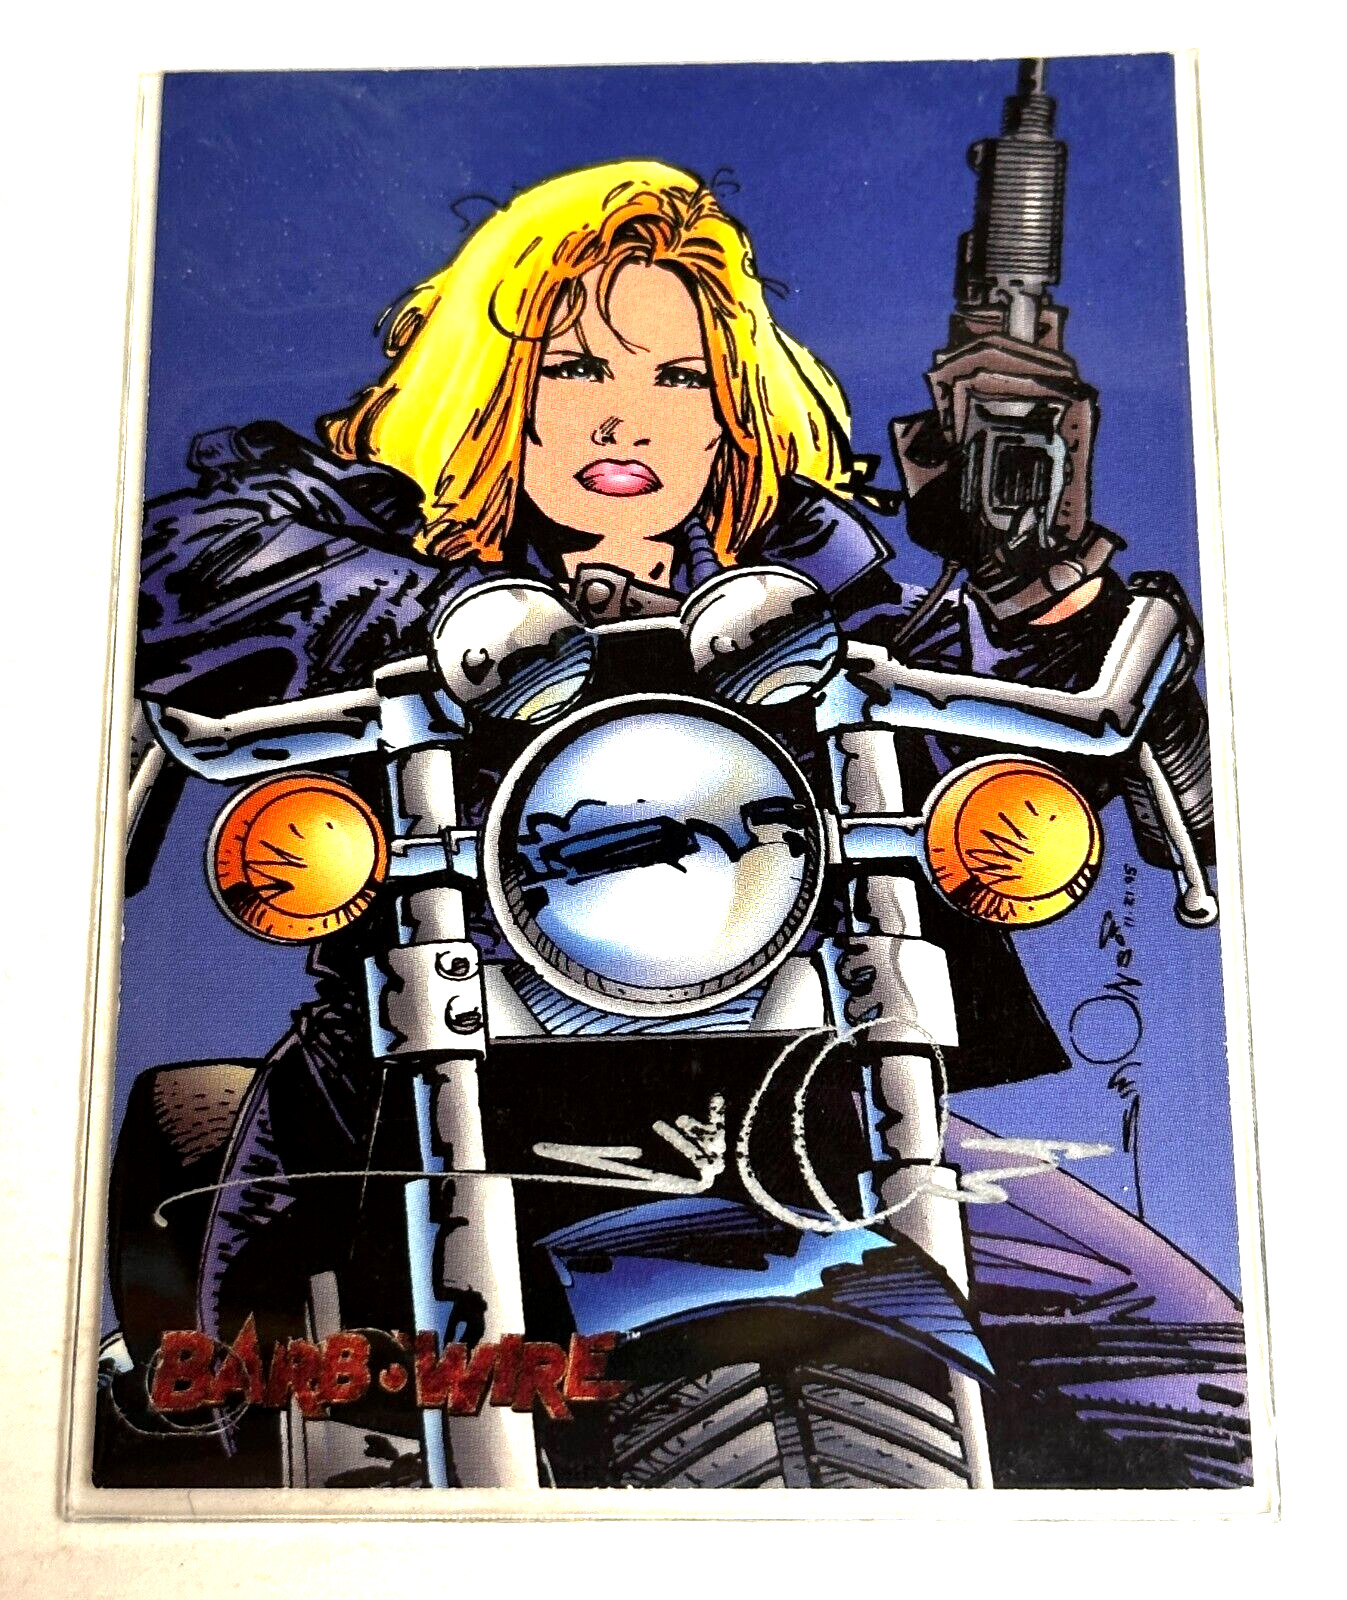 1996 Barb Wire Trading Card Signed by Walt Simonson (Thor 1983-87) from Topps